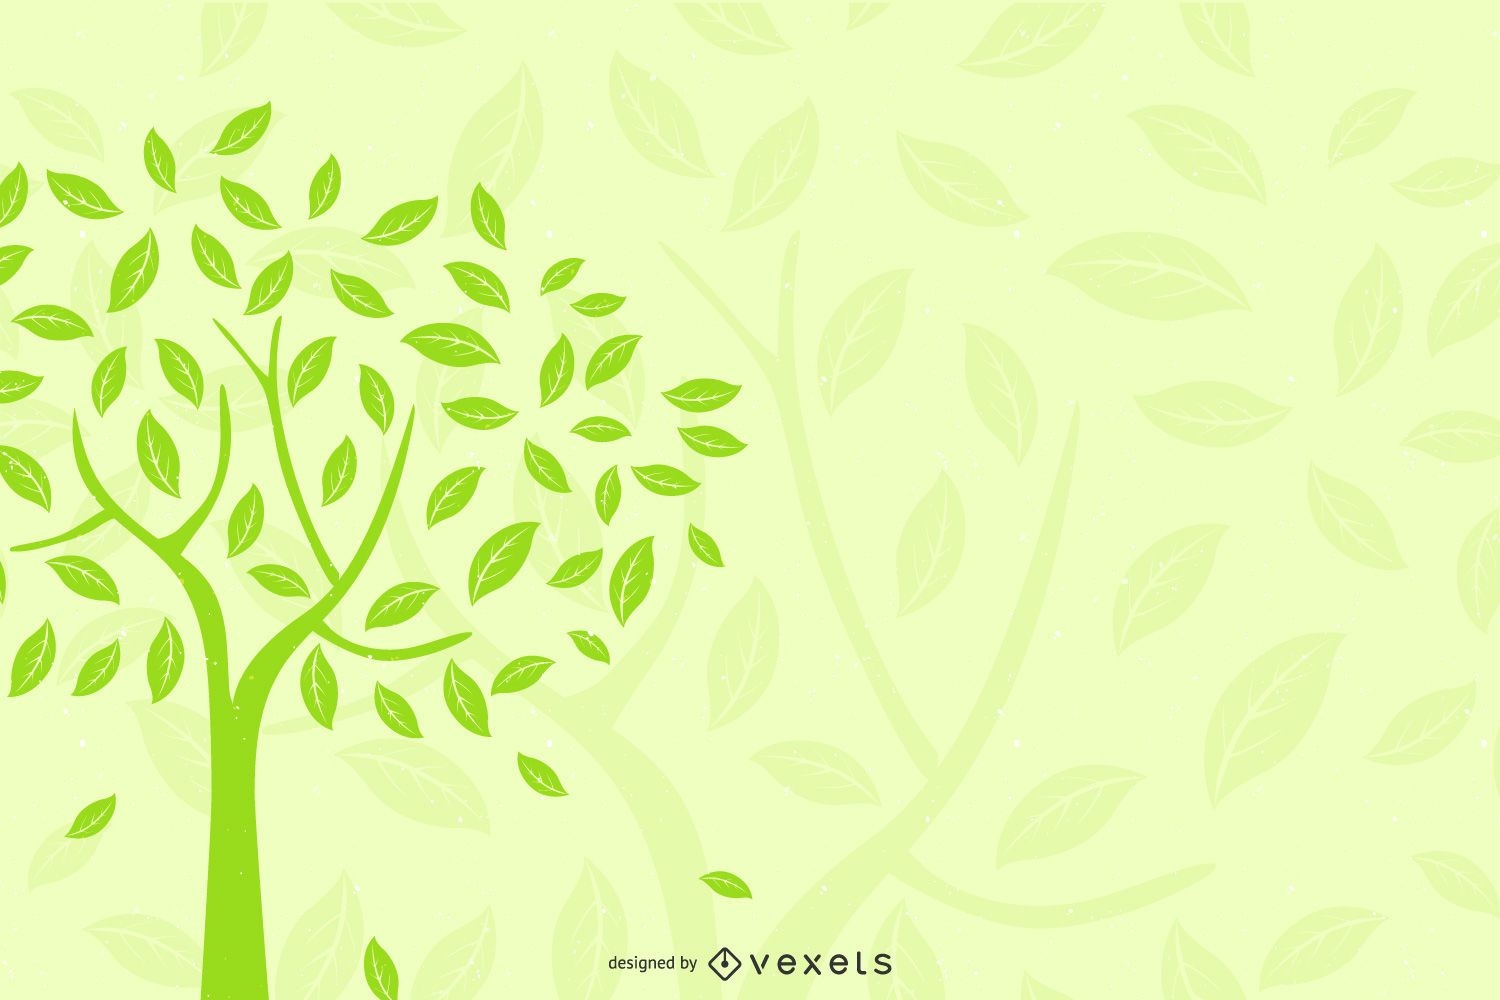 Eco-Friendly Silhouette Tree Background Vector Download